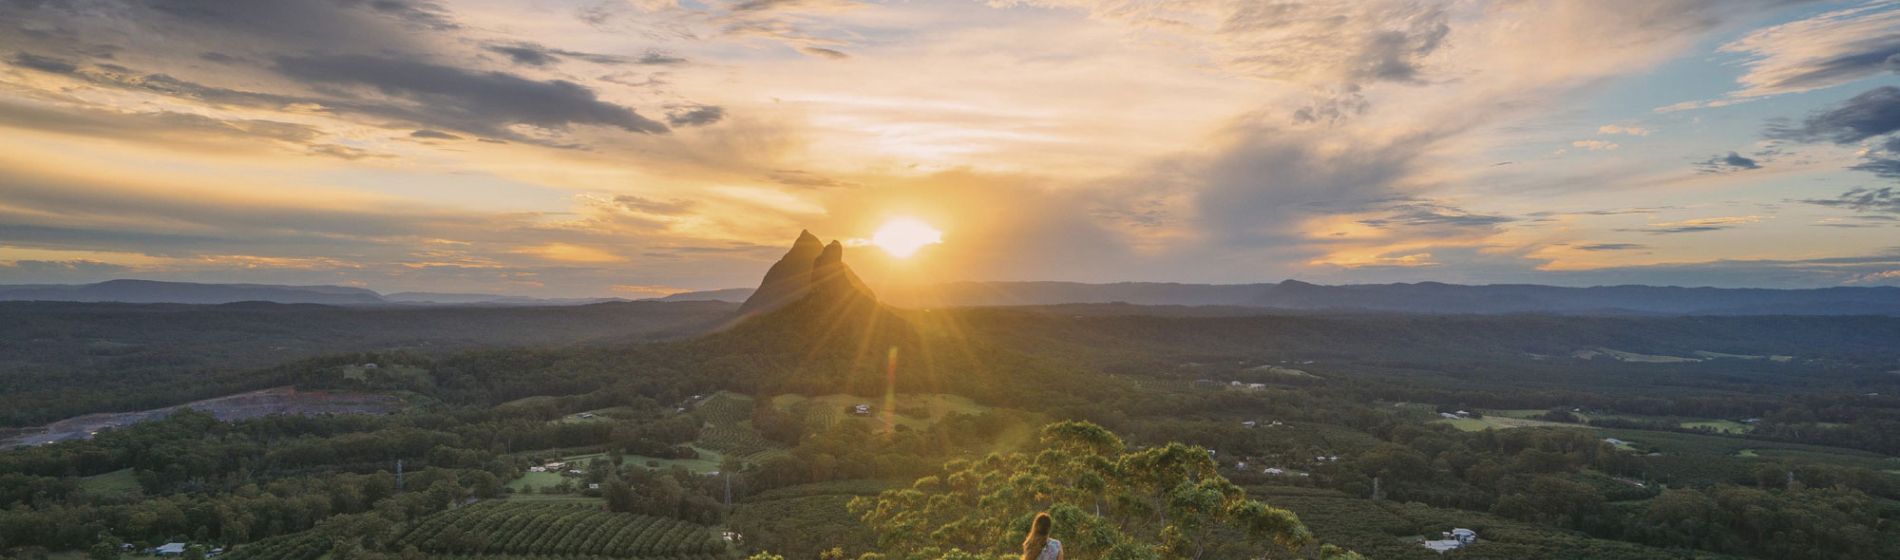 qld_south_glasshouse_mountains_tourism_events_qld_jason_charles_hill.jpg